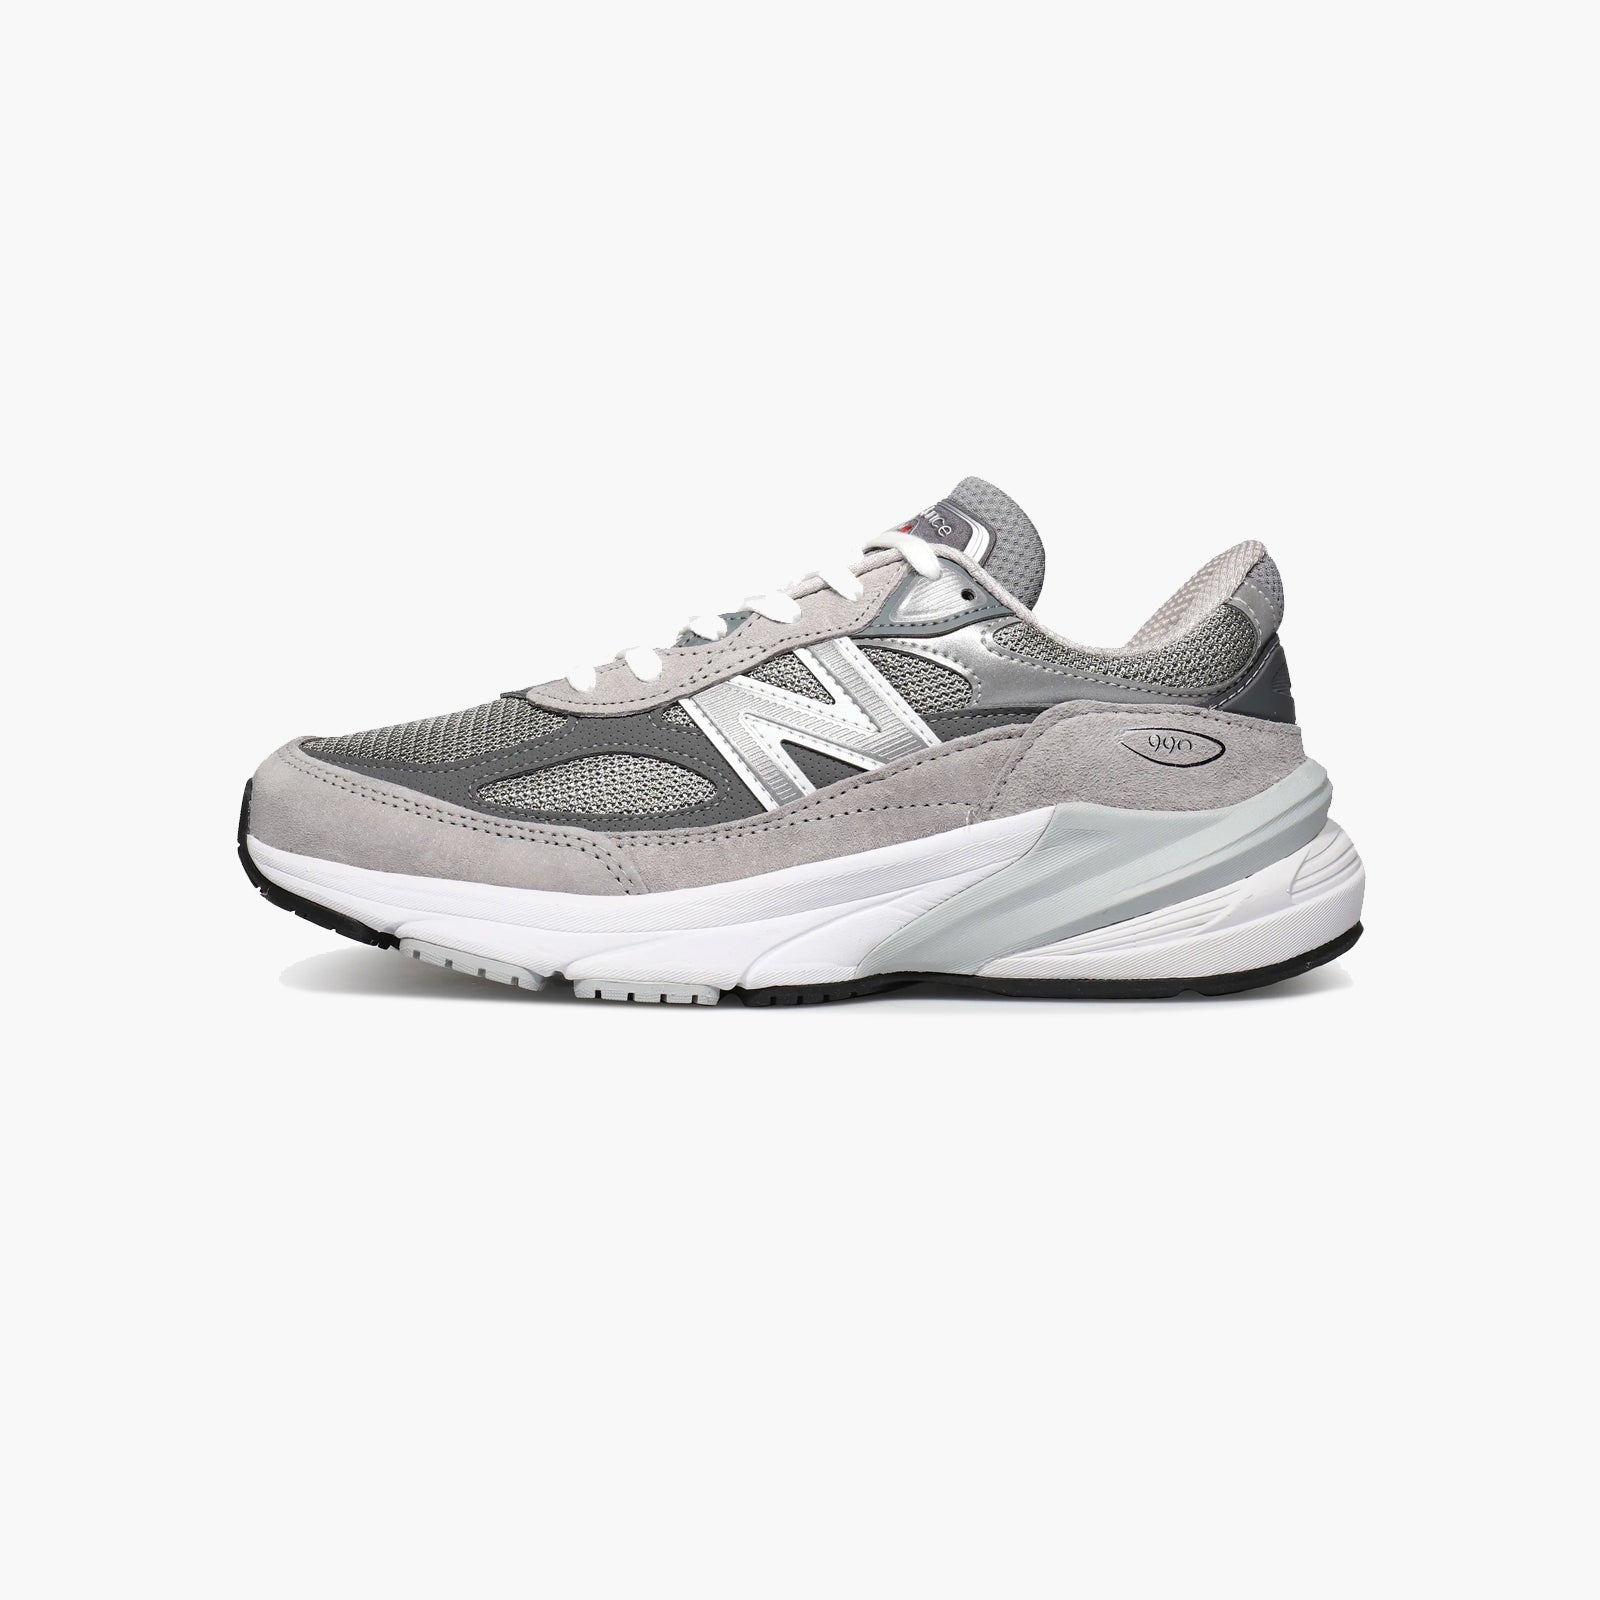 New Balance 990v6 Made in USA-SUEDE Store